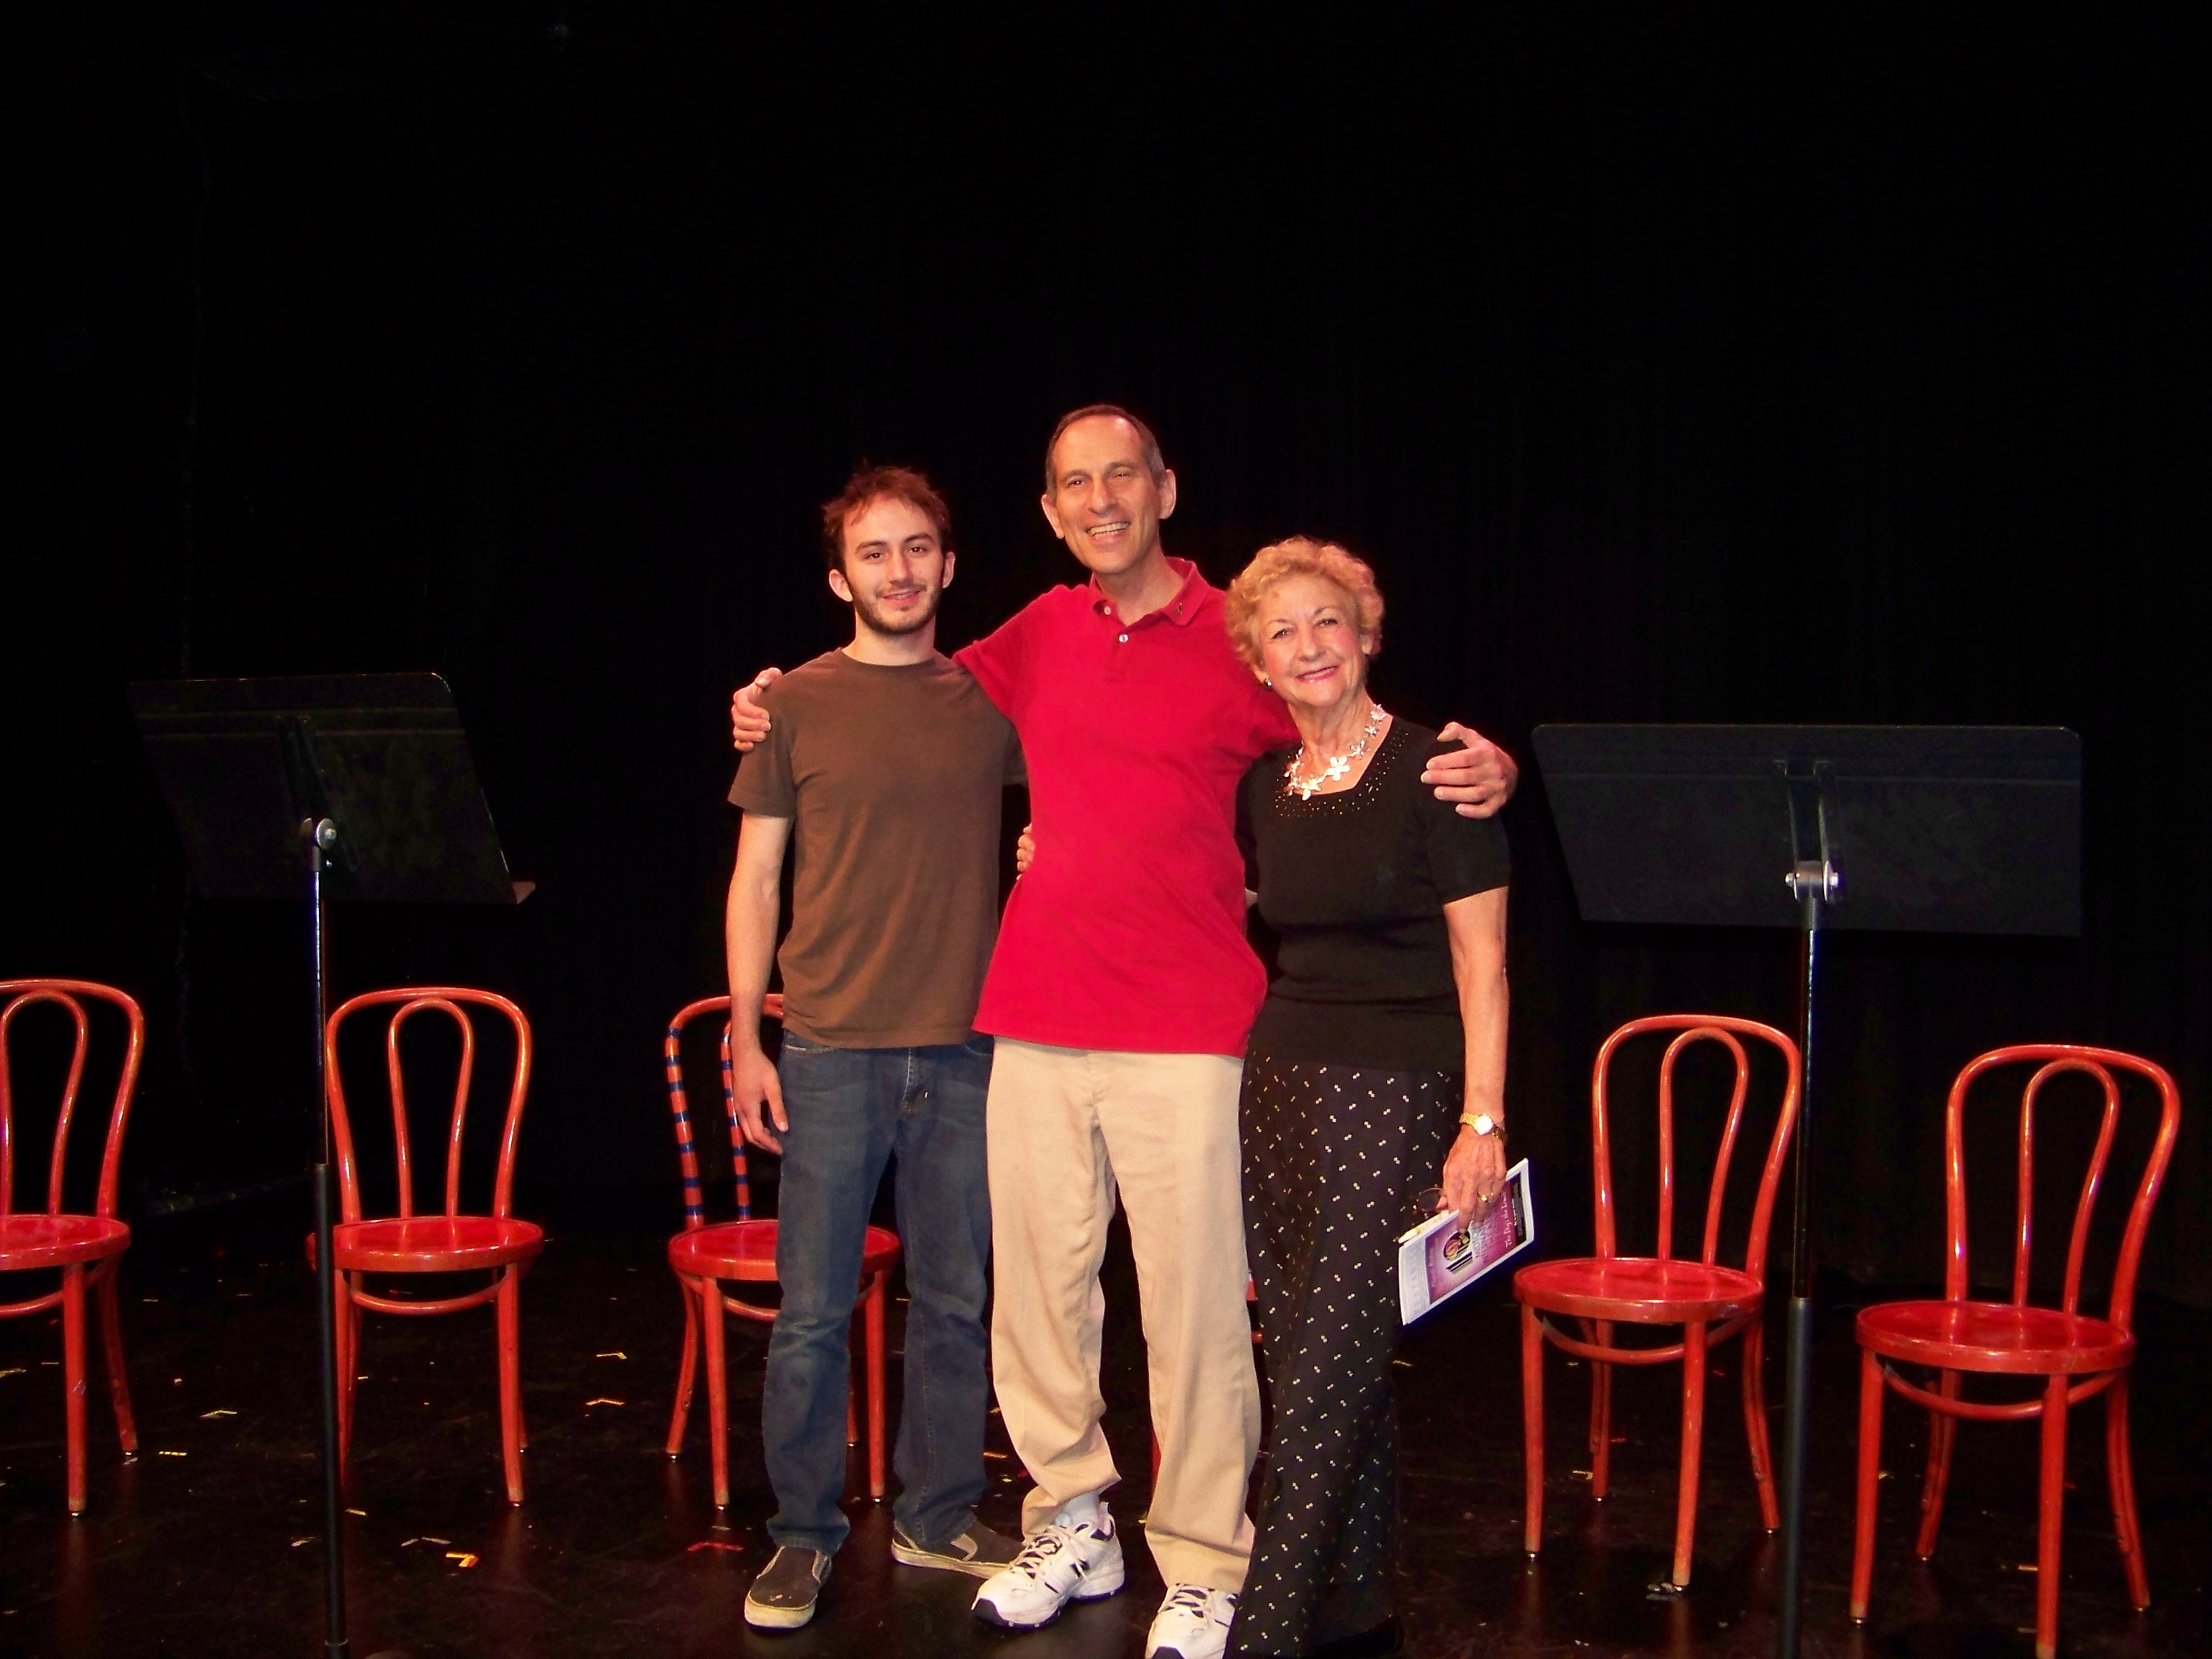 (date posted). Bryan Ridgell, Phillip W. Weiss and Langley Deaver, June Havoc Theater, New York City, 7/21/09.